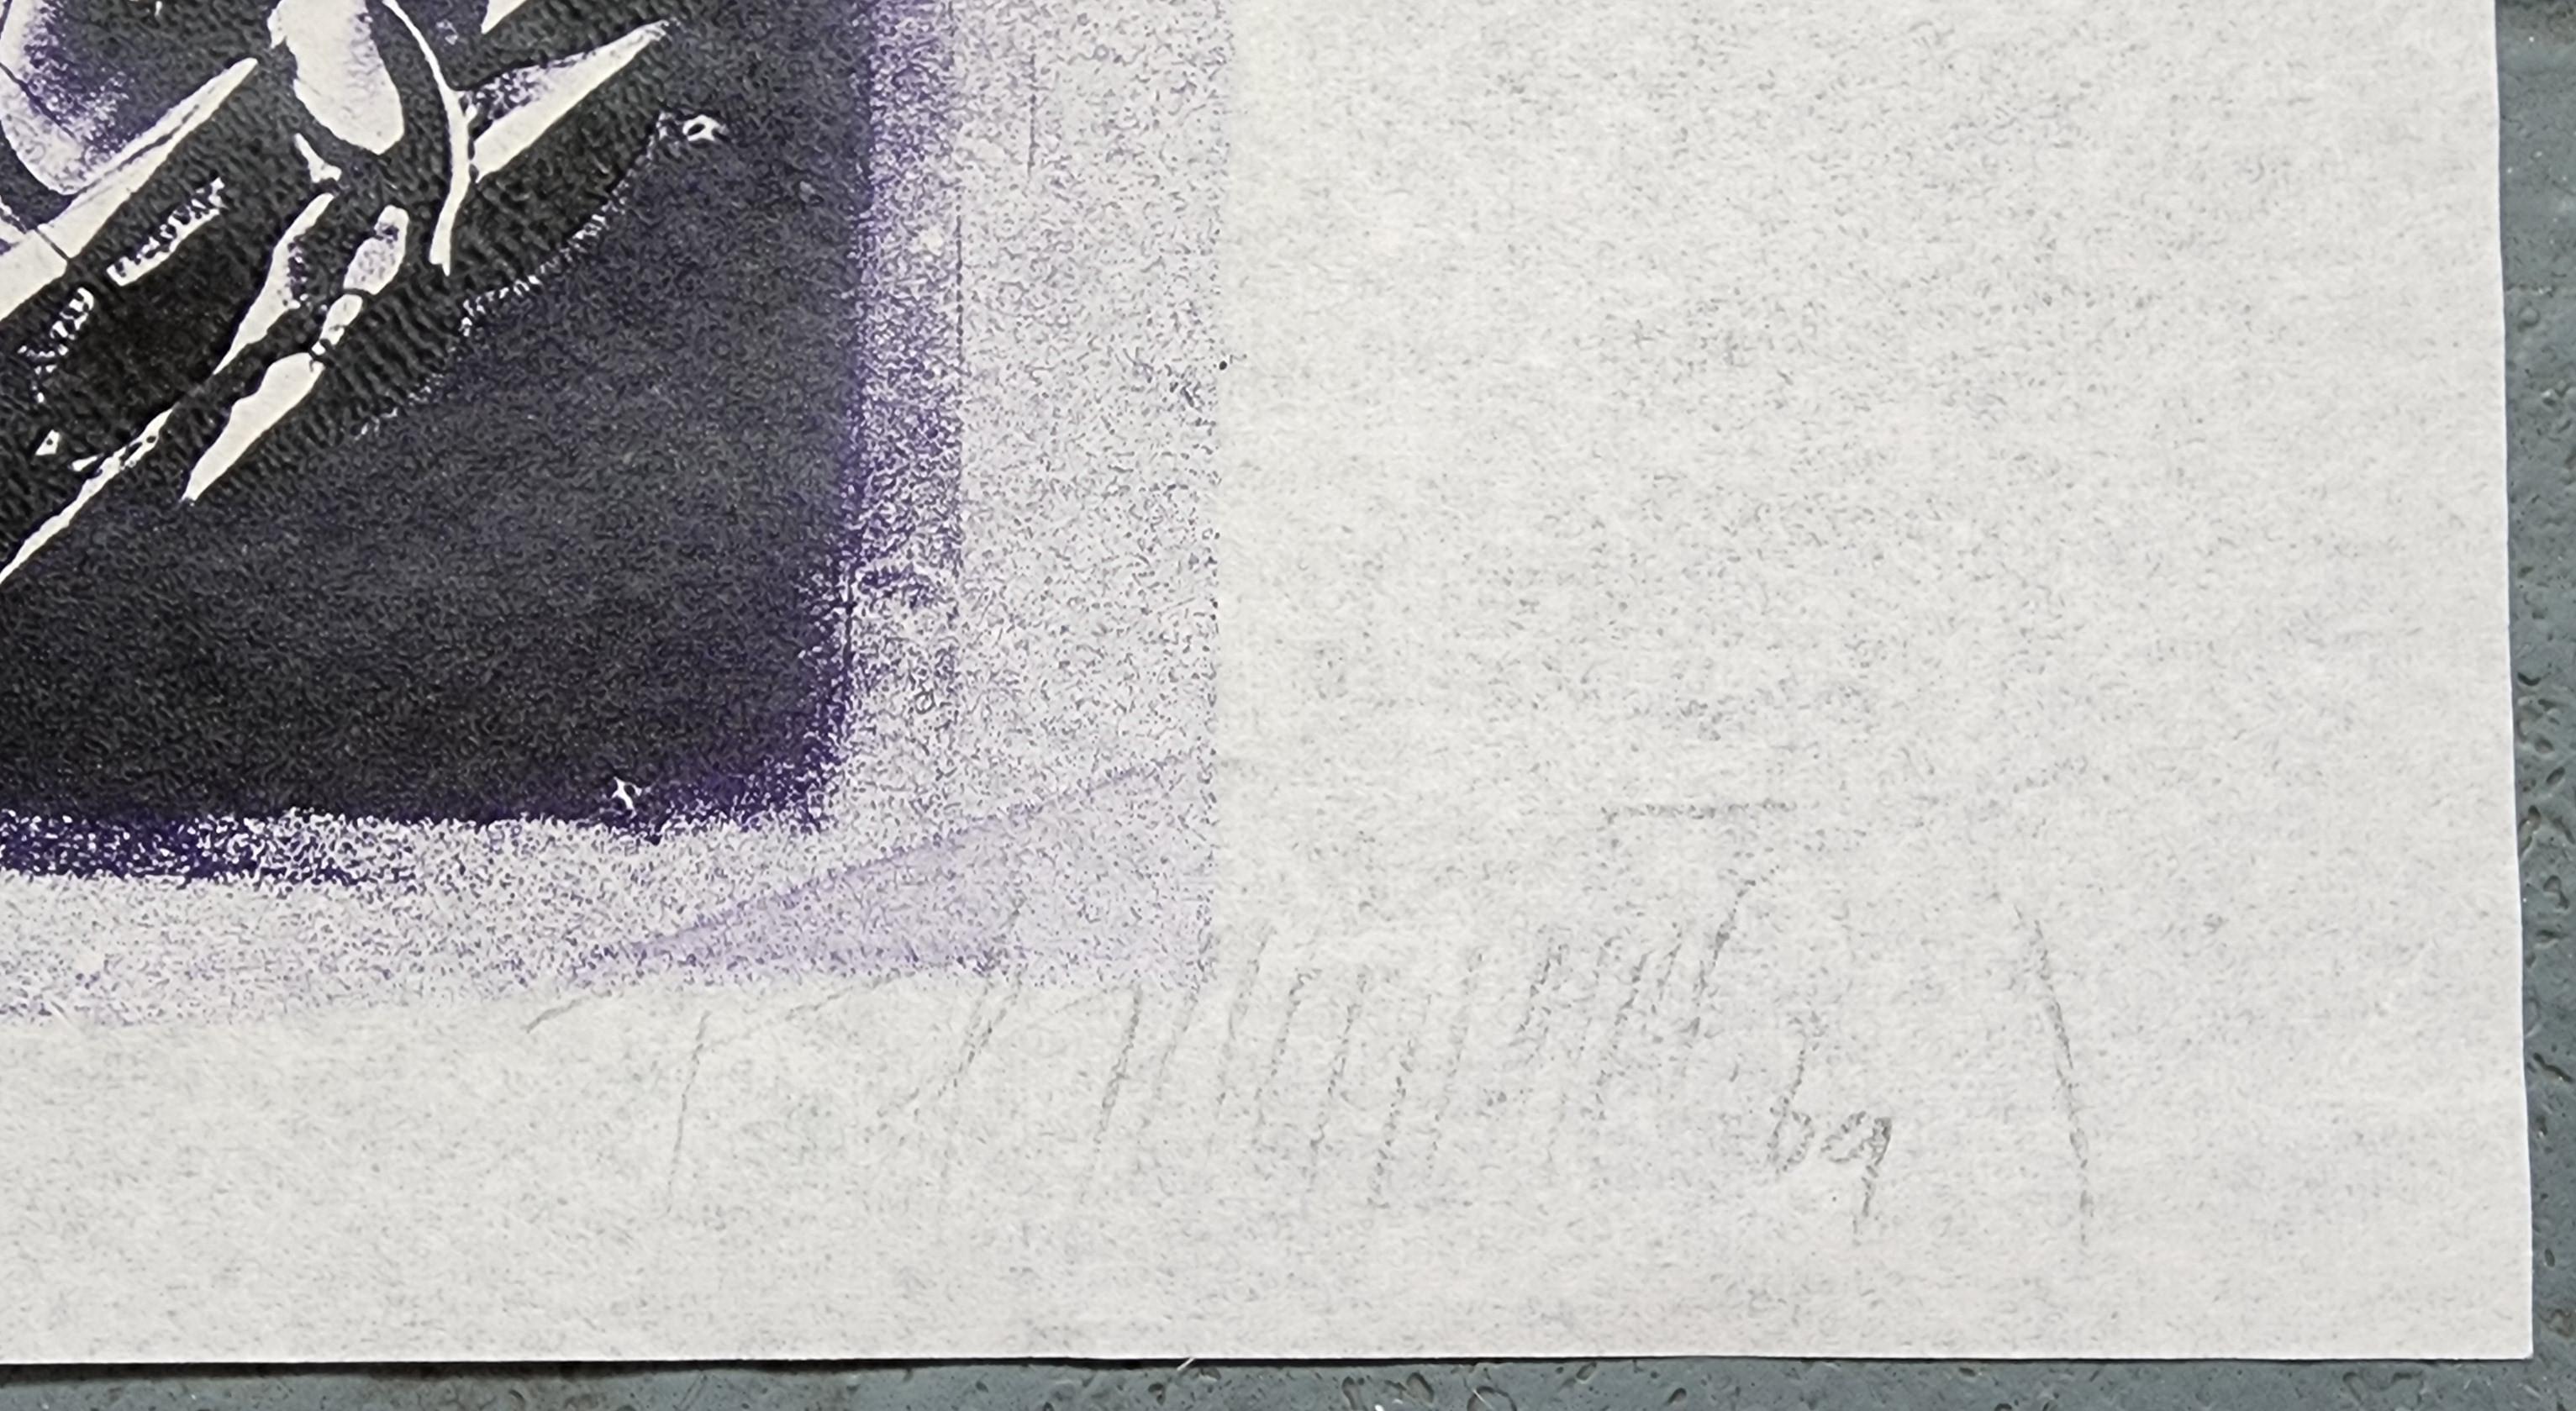 Fred Alfred Theophil Fathwinter
Untitled Abstract Composition 
Monotype
Year: 1969
signed, numbered and dated by hand
Size: 11.0×3.9in on 11.6×8.3in 
COA provided
Ref.: 924802-1180

Fathwinter, artist name for Franz Alfred Theophil Winter (May 23,